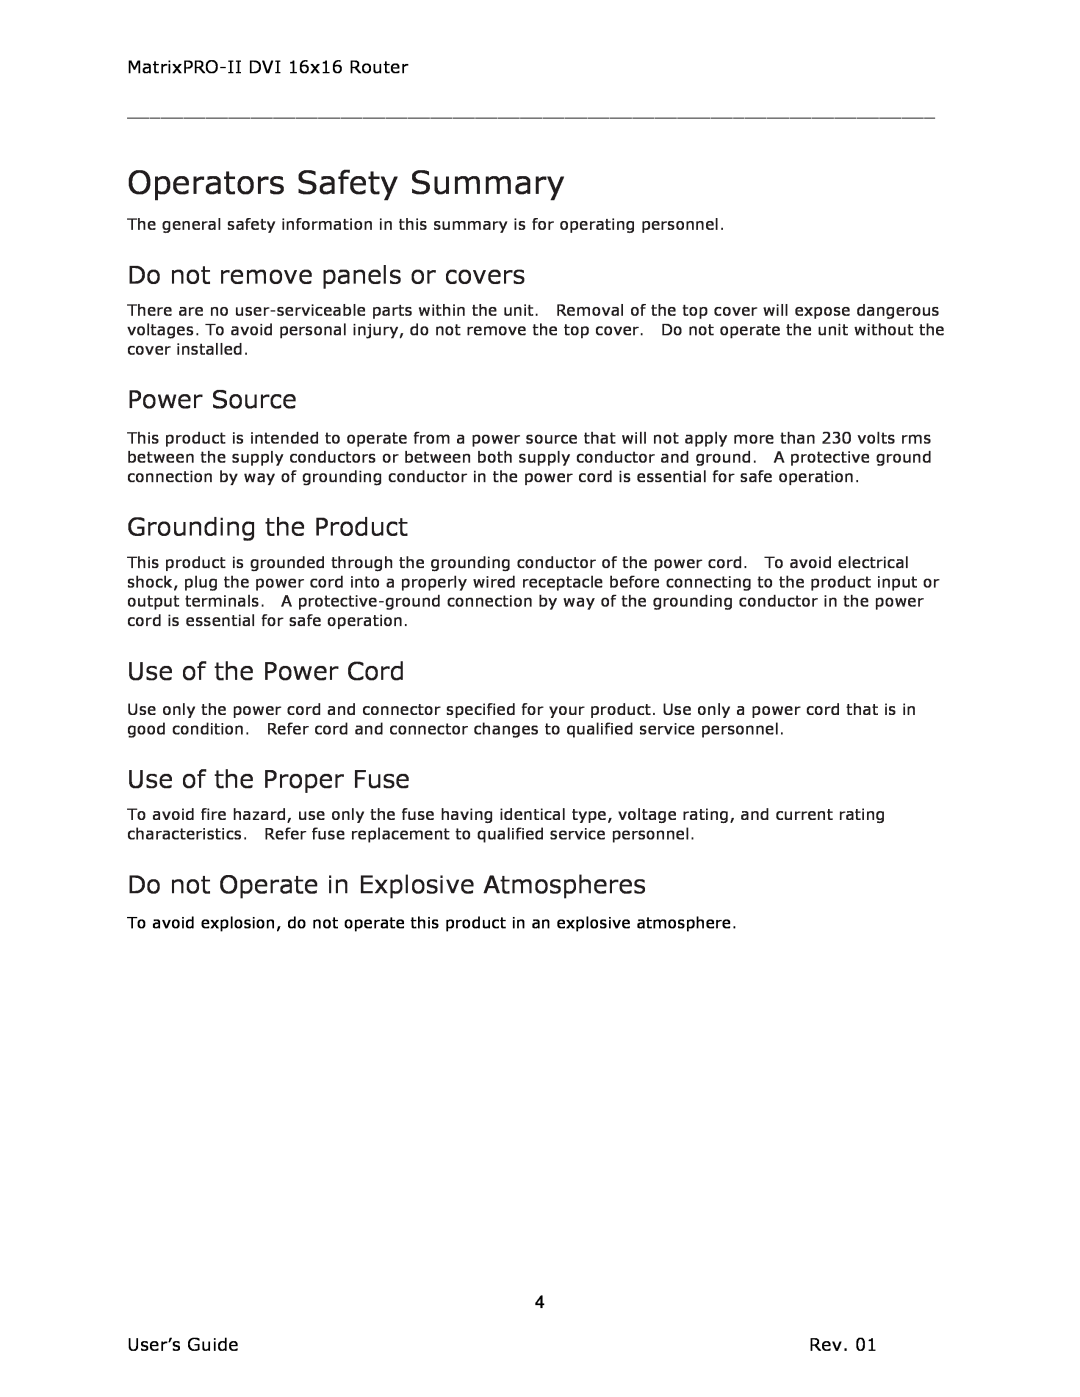 Barco 26-1302001-00 manual Operators Safety Summary, Do not remove panels or covers, Power Source, Grounding the Product 